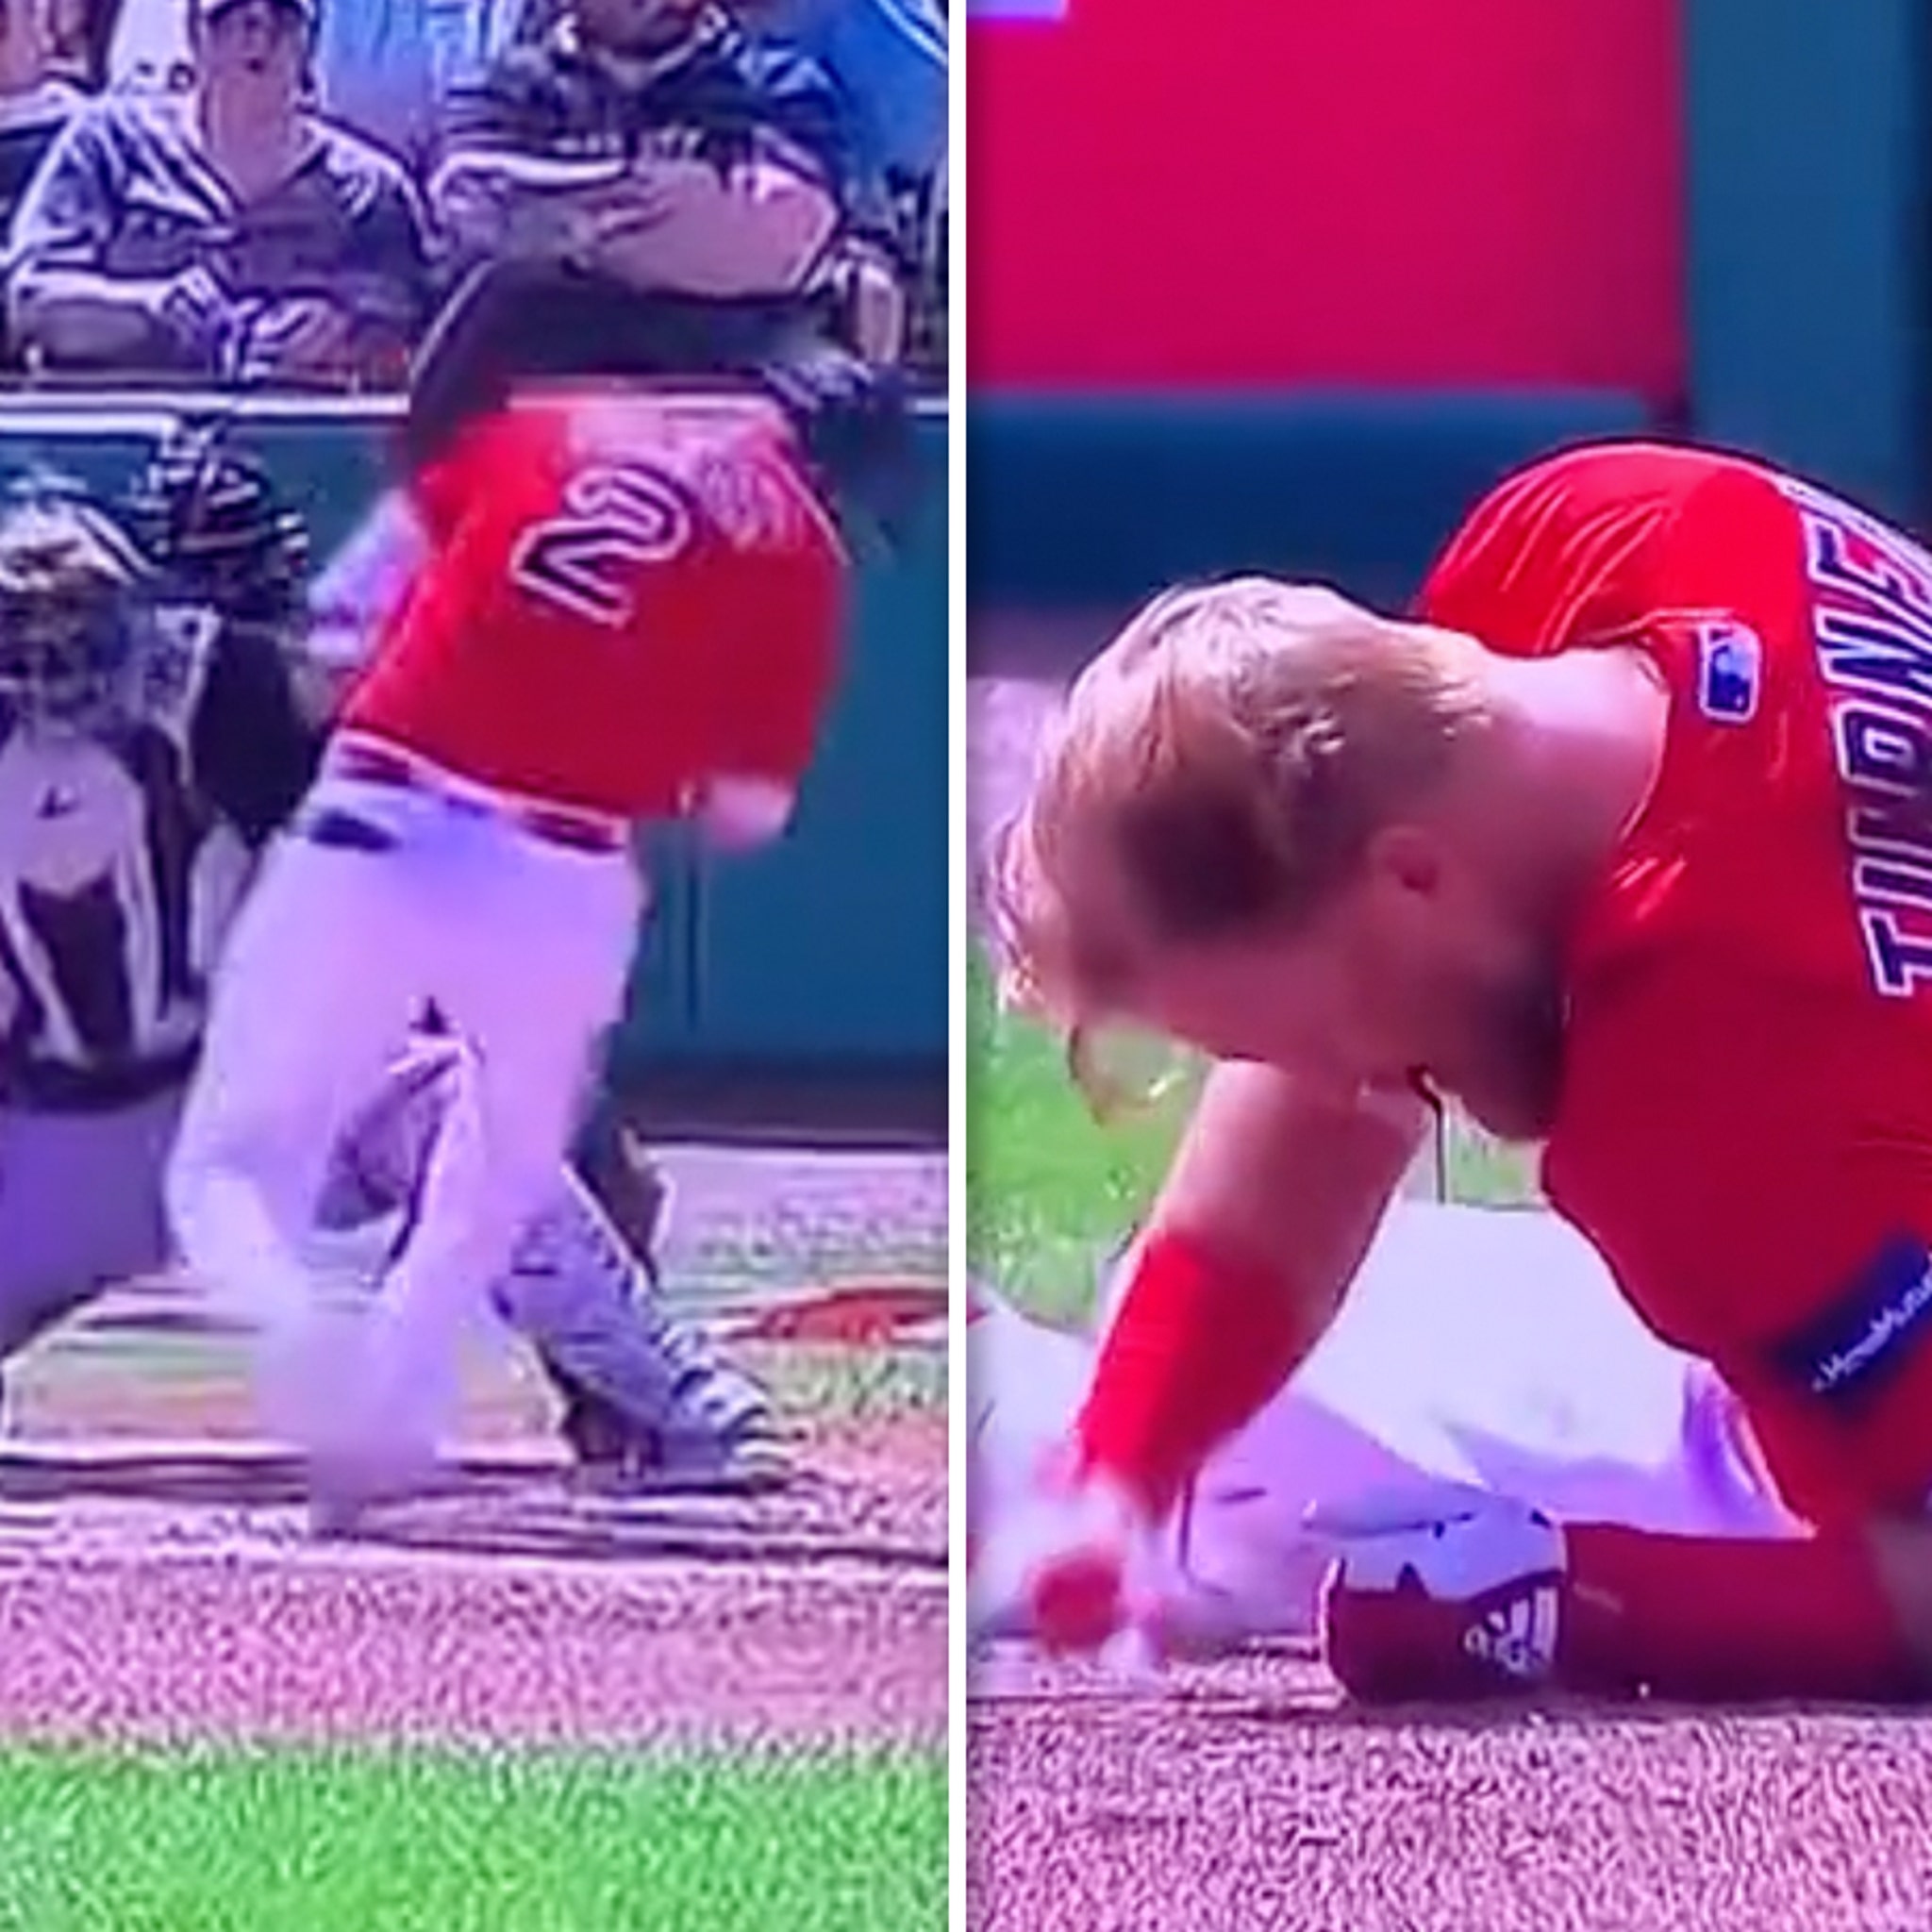 Justin Turner gets hit in the face by a pitch and is taken to hospital